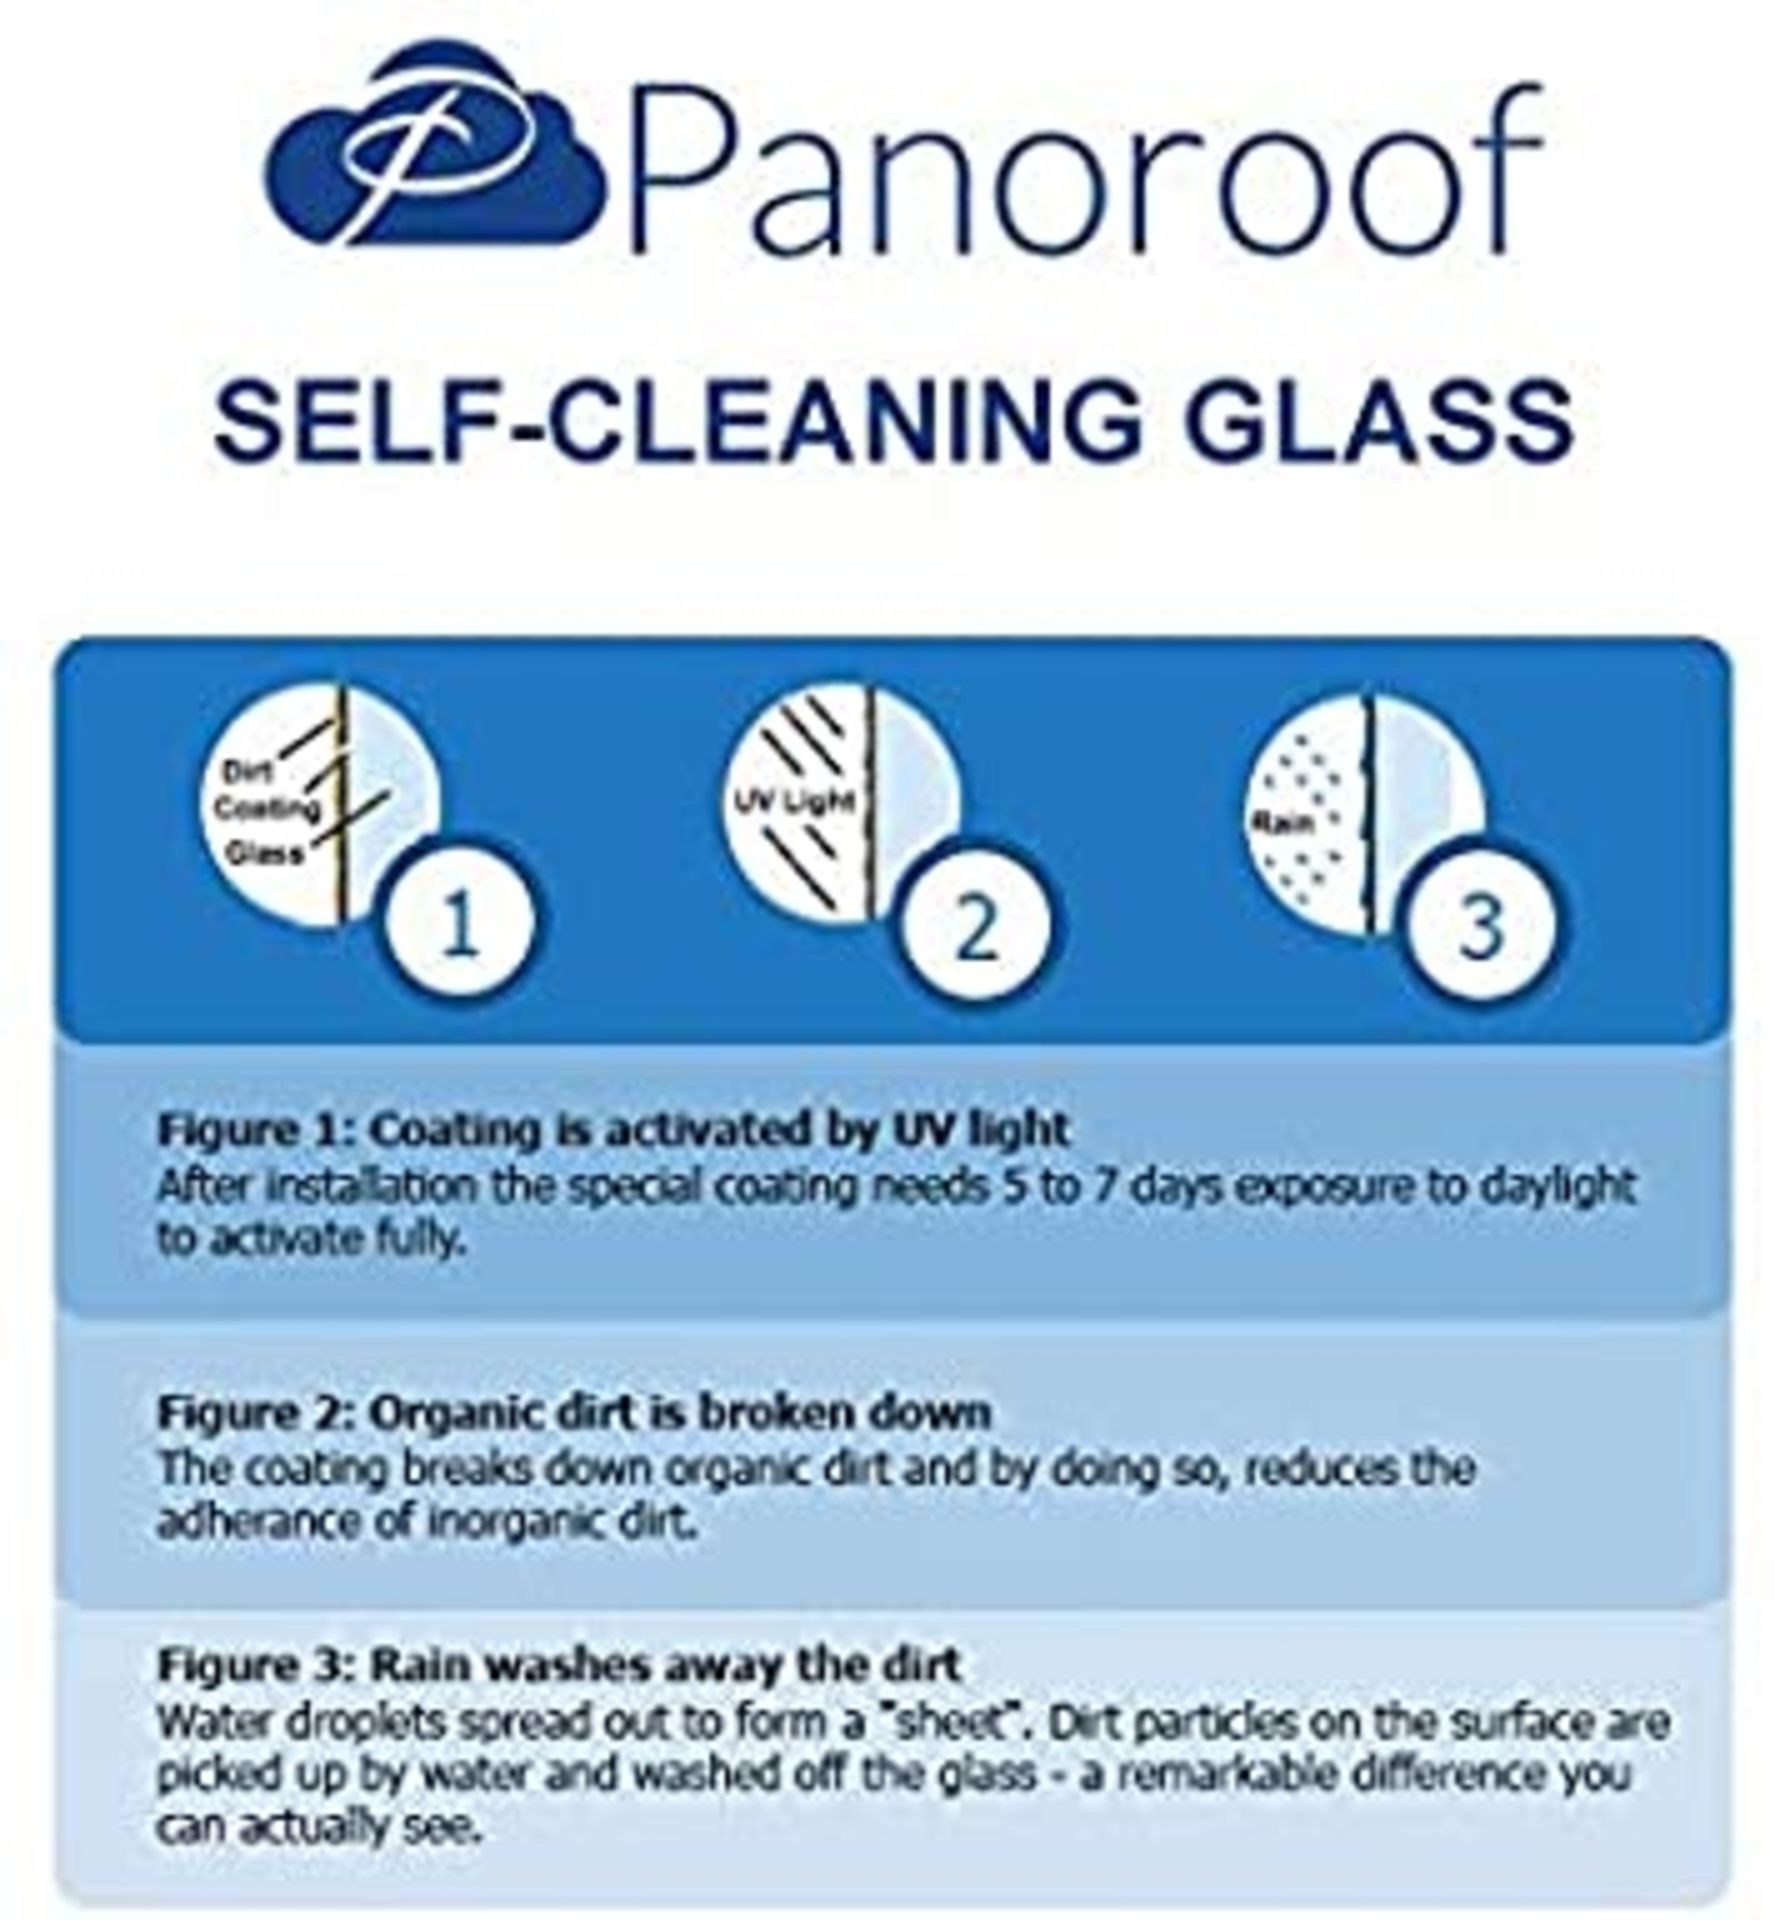 "Panoroof Triple Glazed Self Cleaning , 400x1500mm (inside Size Visable glass area) Seamless Glass - Image 6 of 6